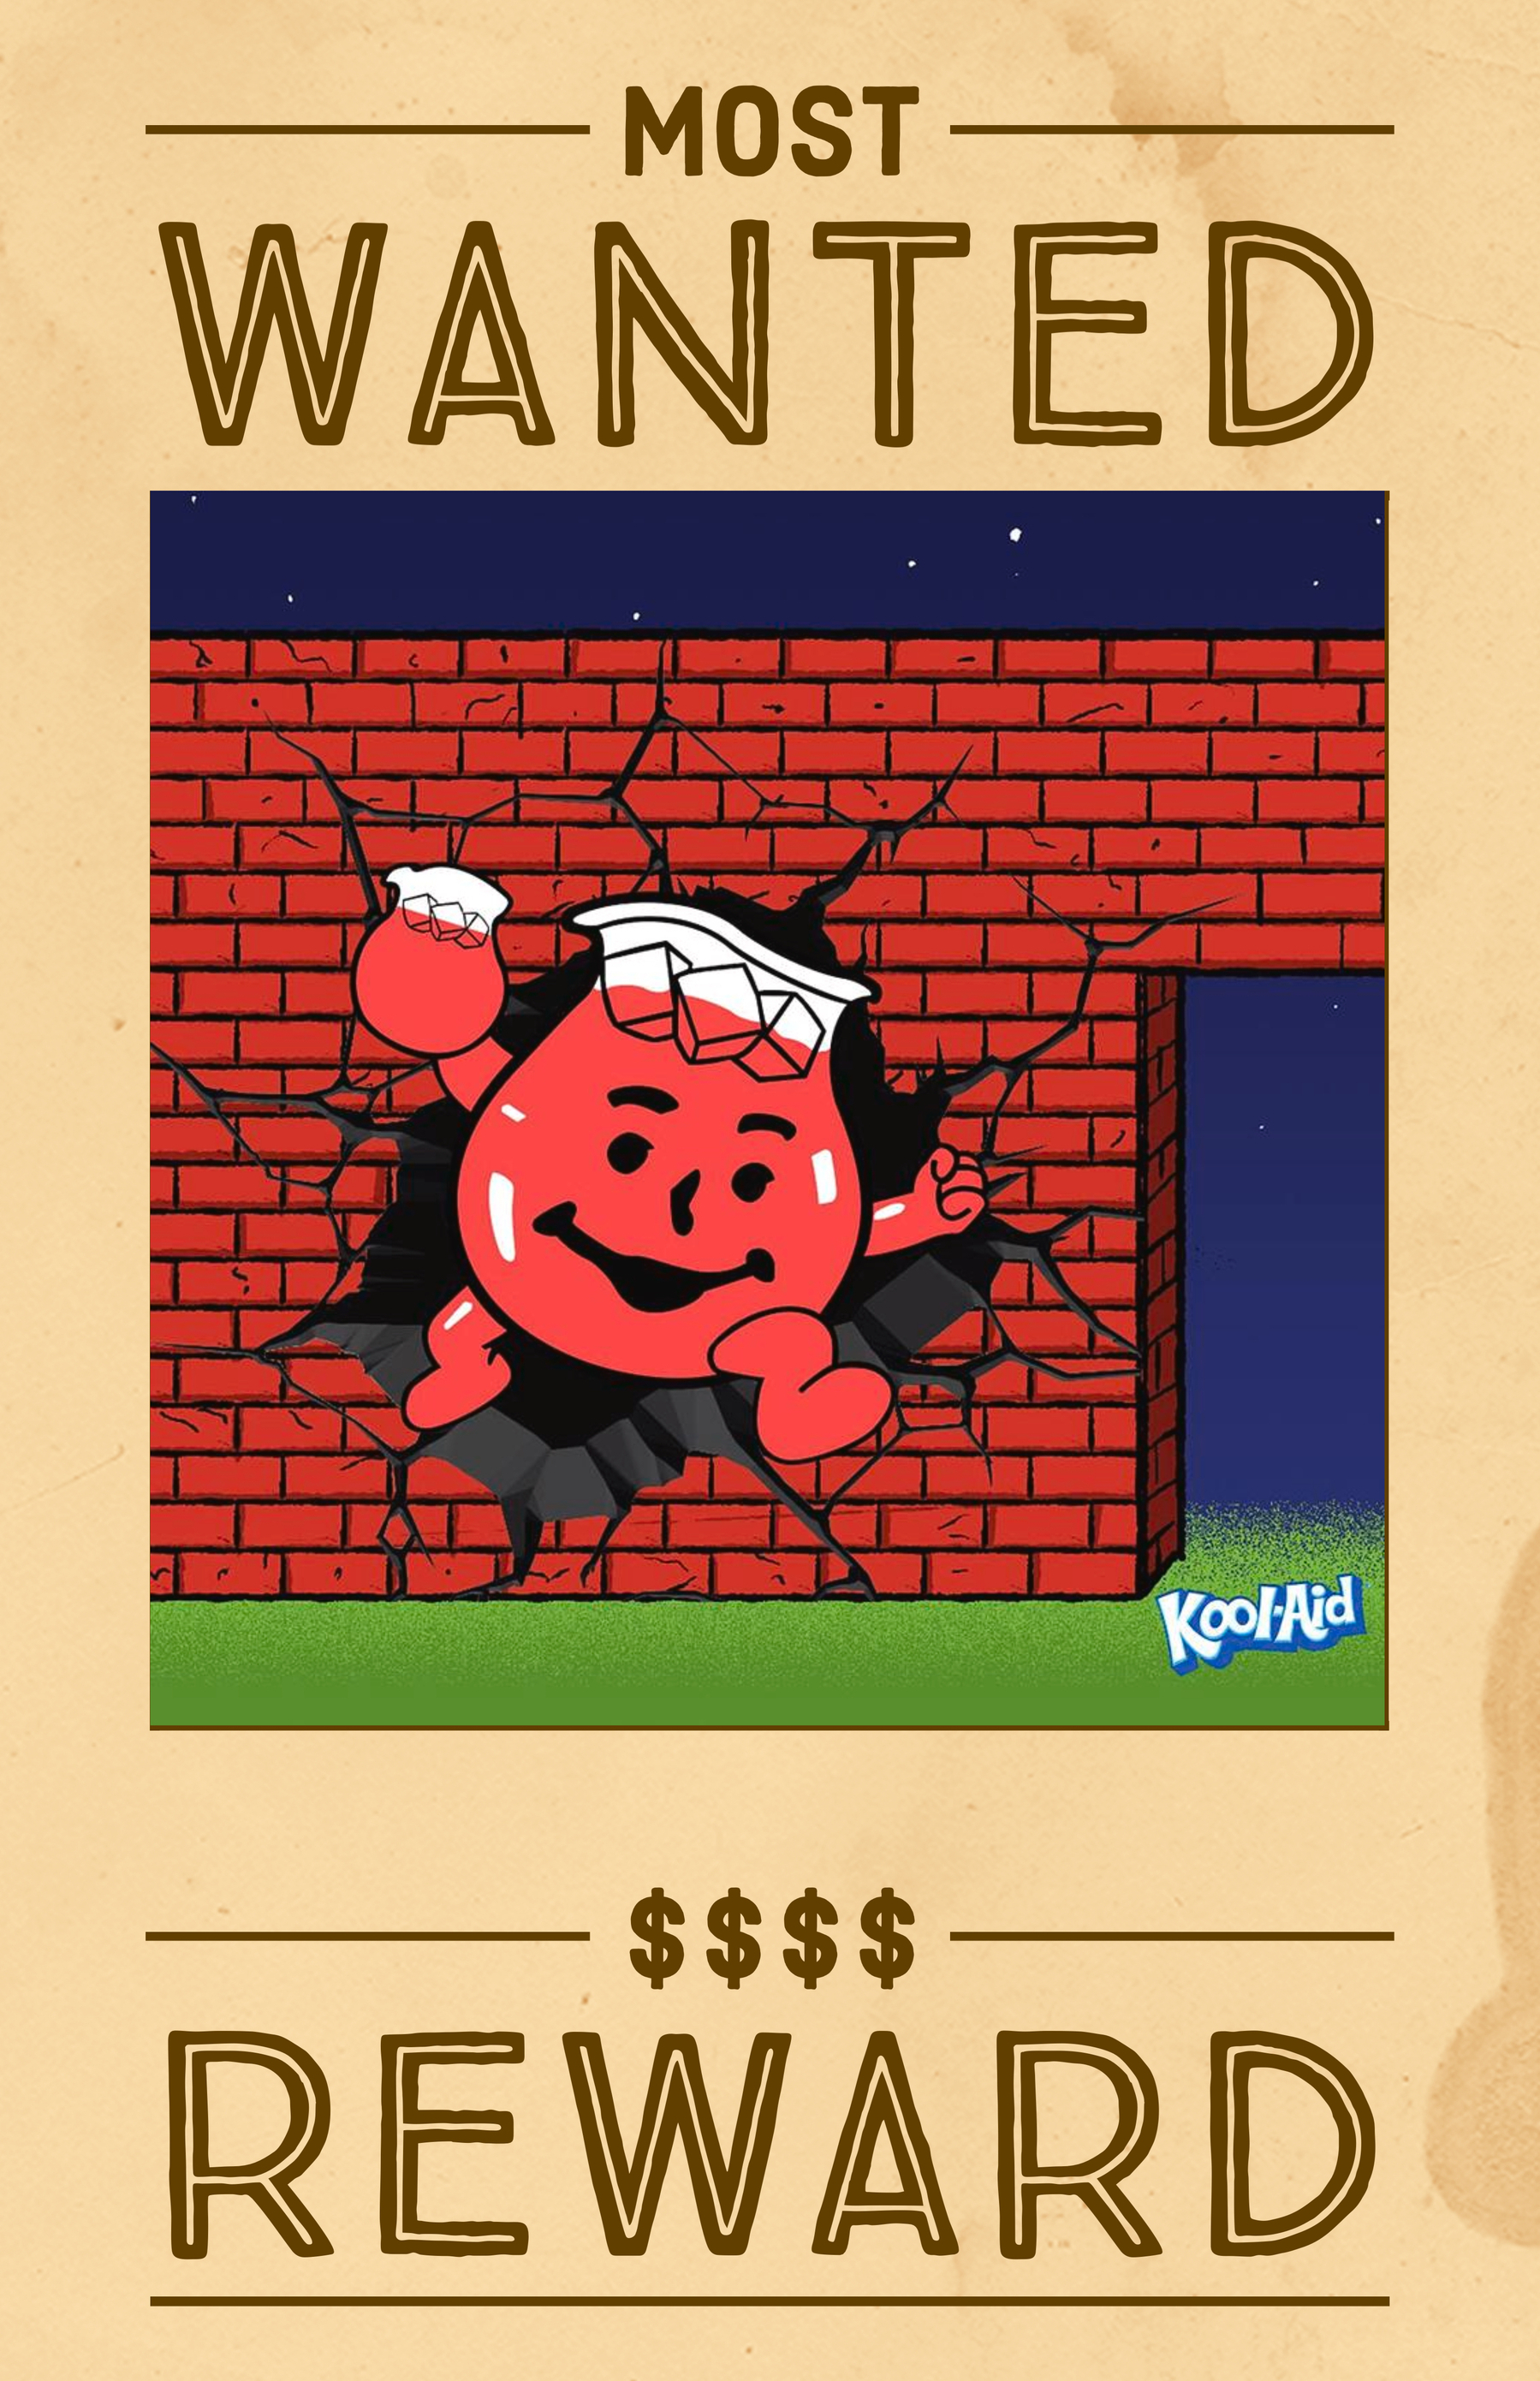 A Western-looking 'Wanted' poster where the criminal's photo is the KoolAid pitcher breaking through a red brick wall.